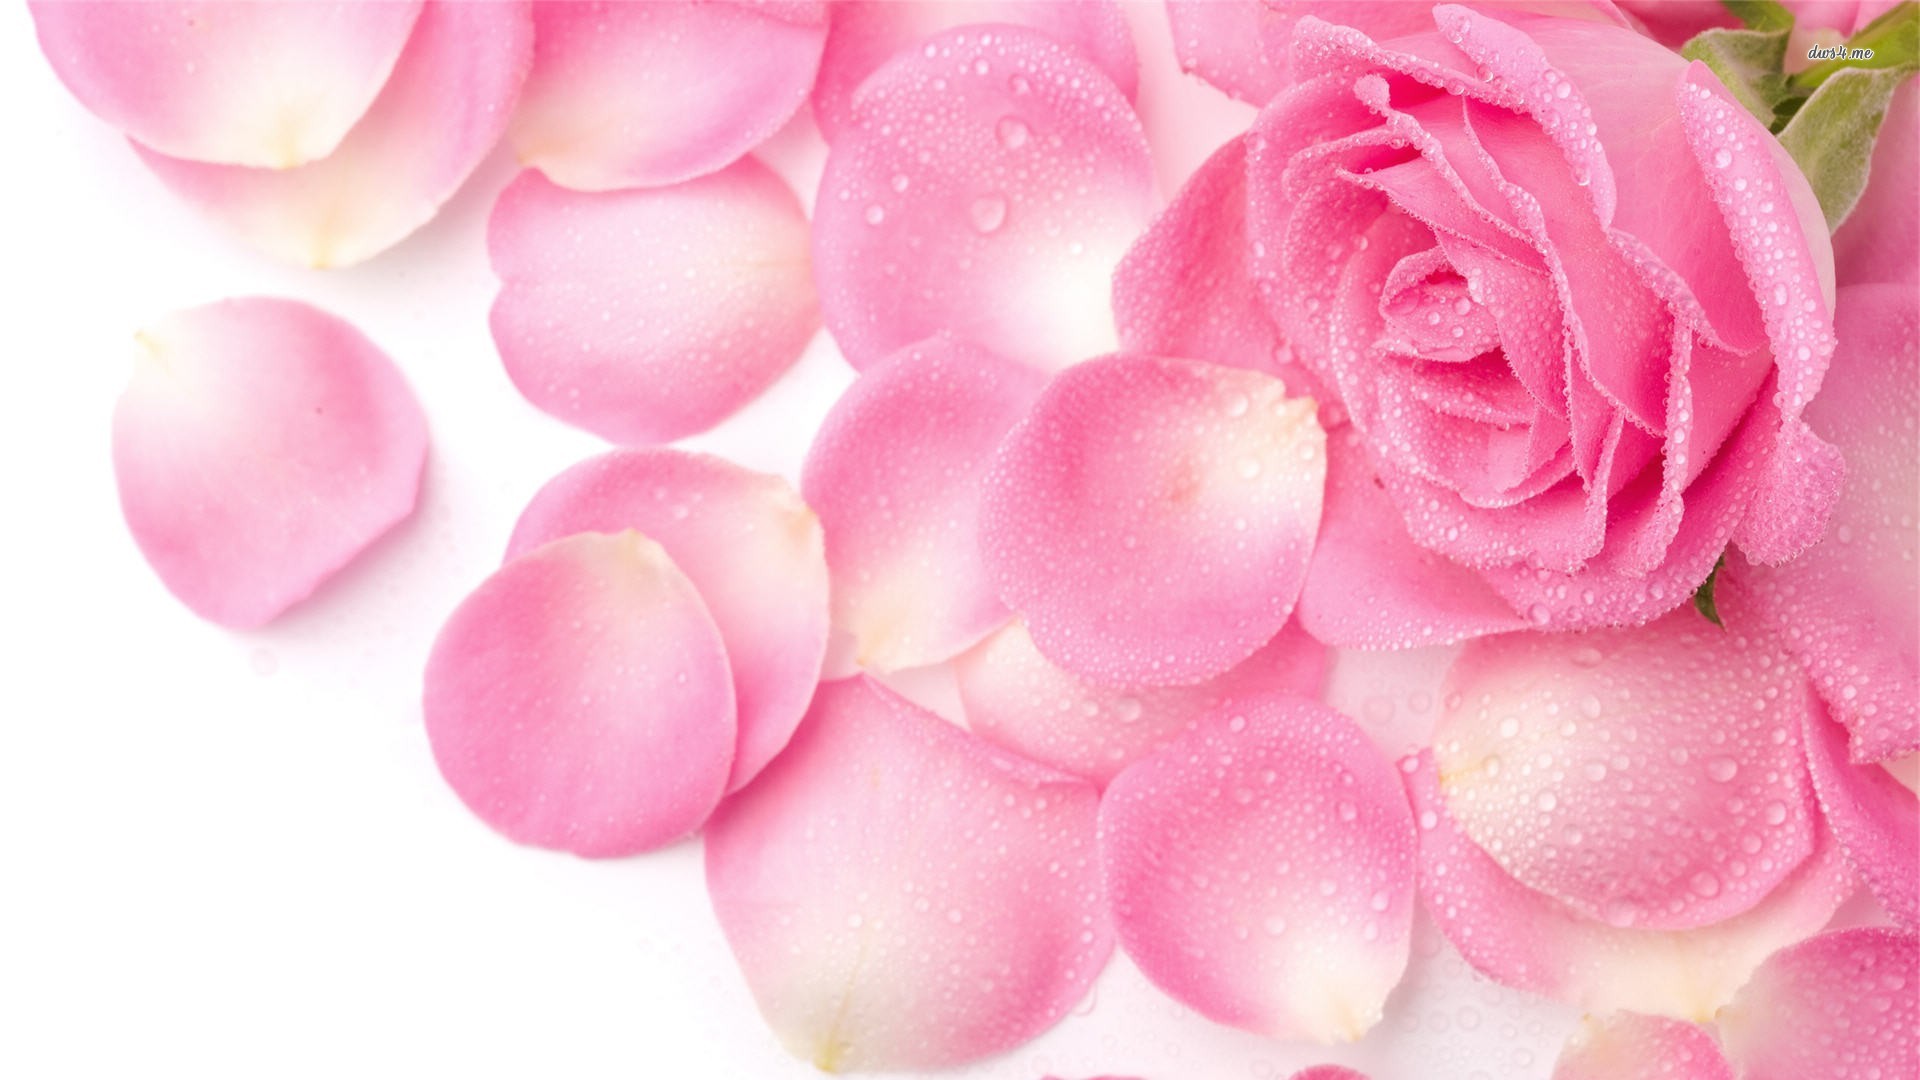 View and Download HD Wallpapers 1080p Pink Rose Petals ...